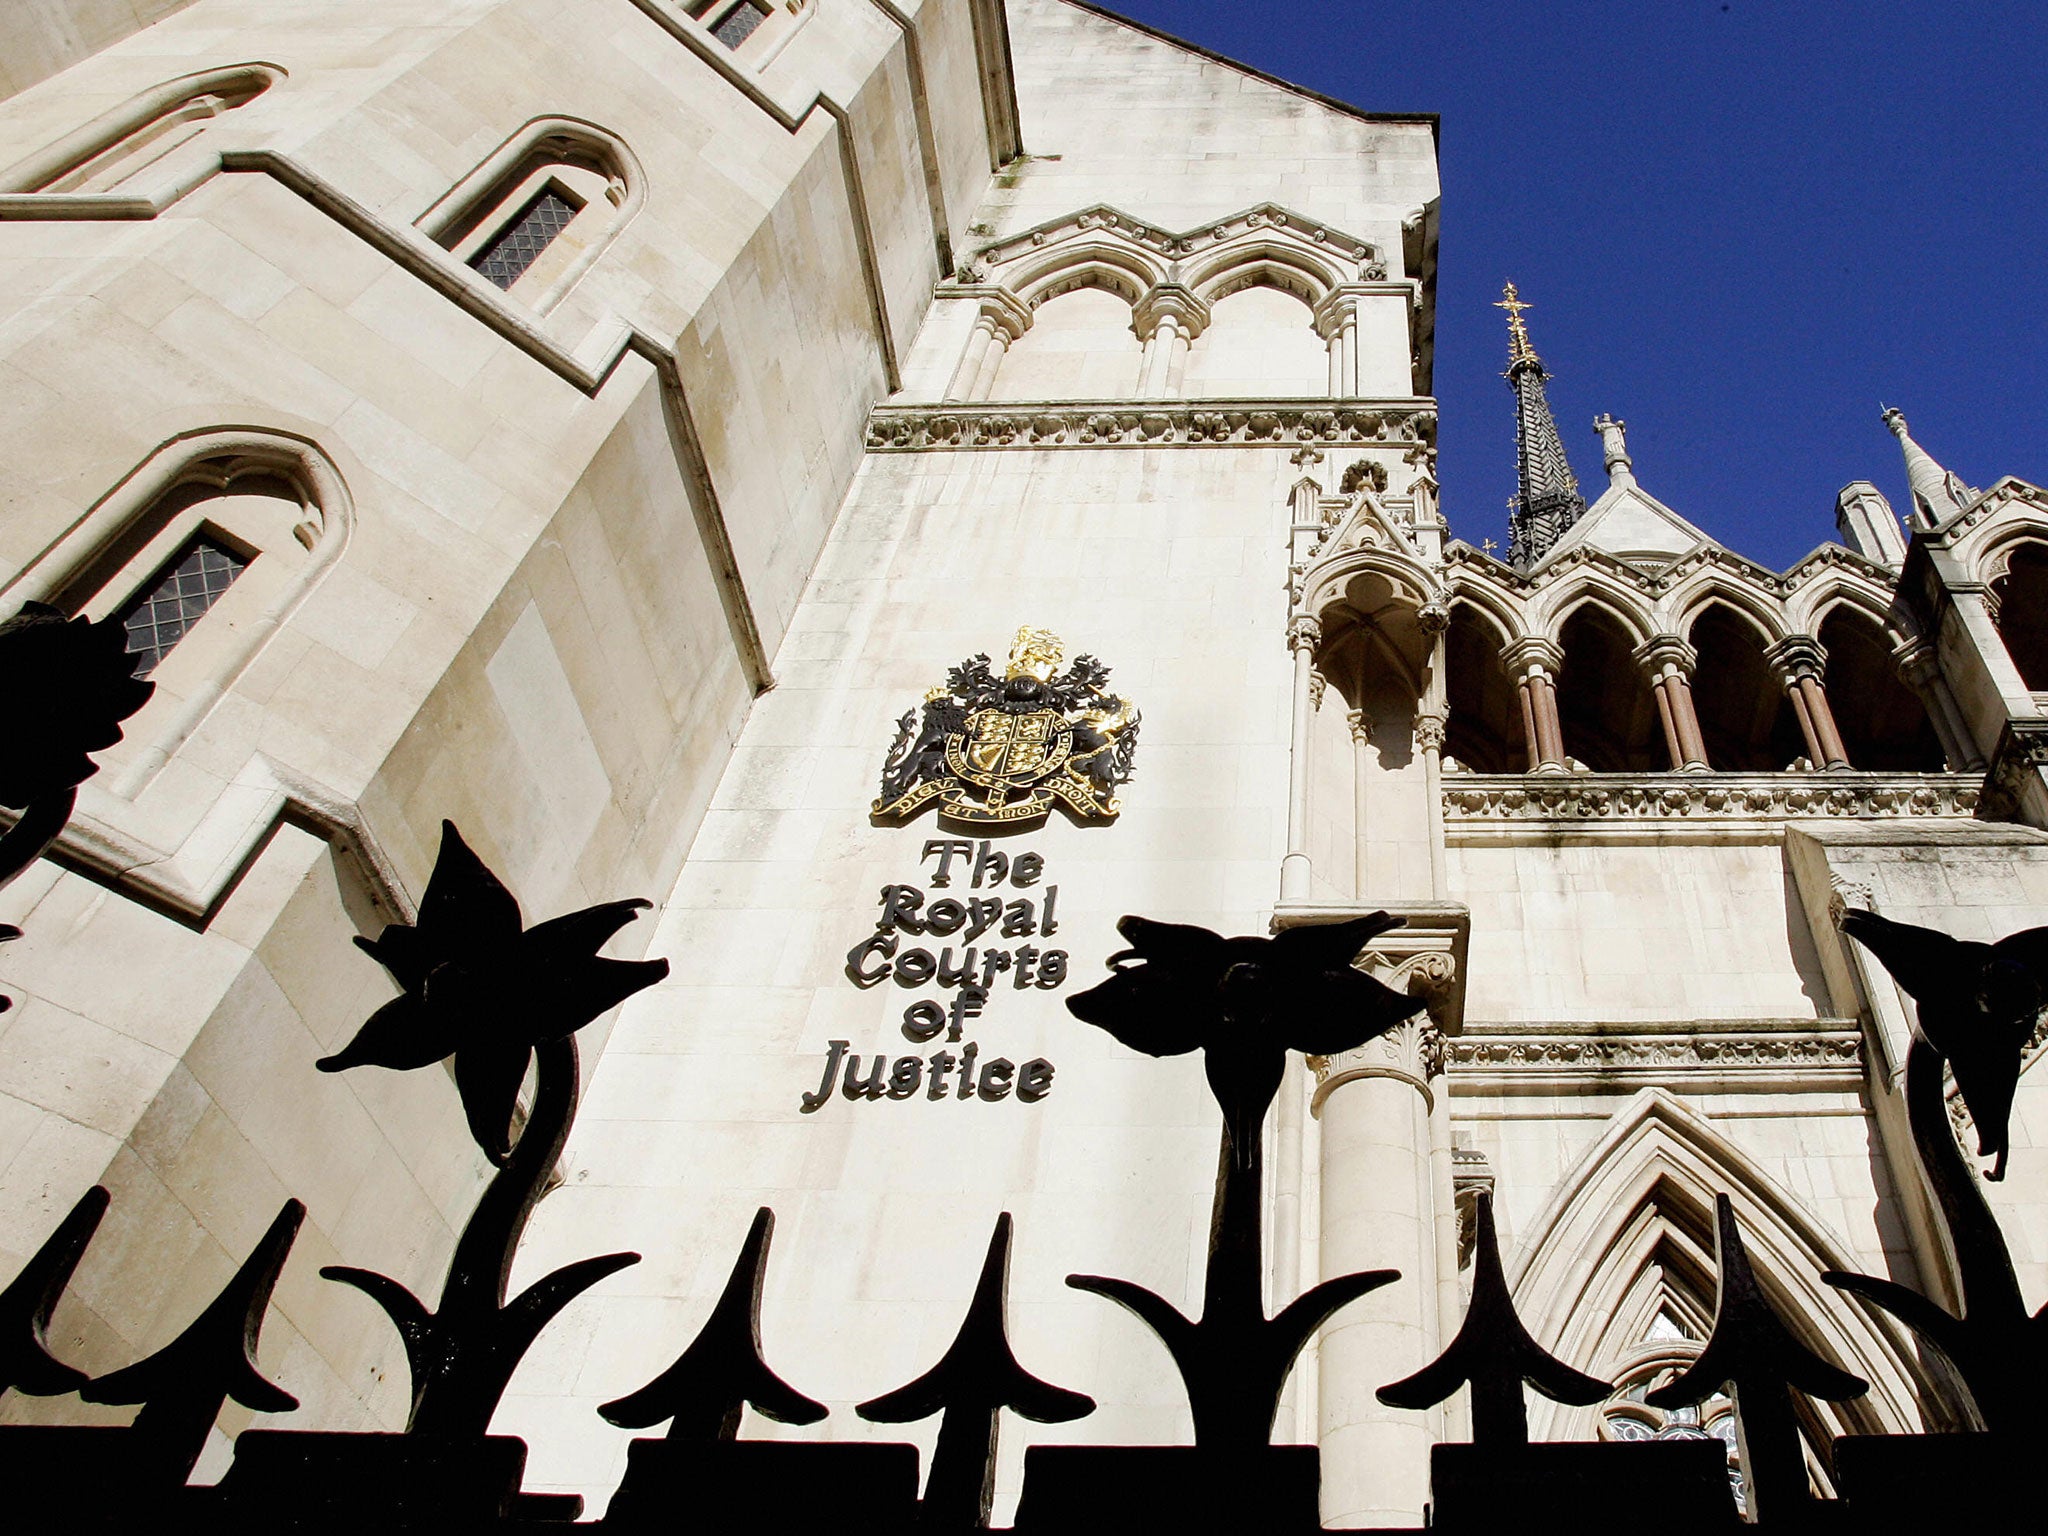 The Court of Appeal granted the original injunction in January